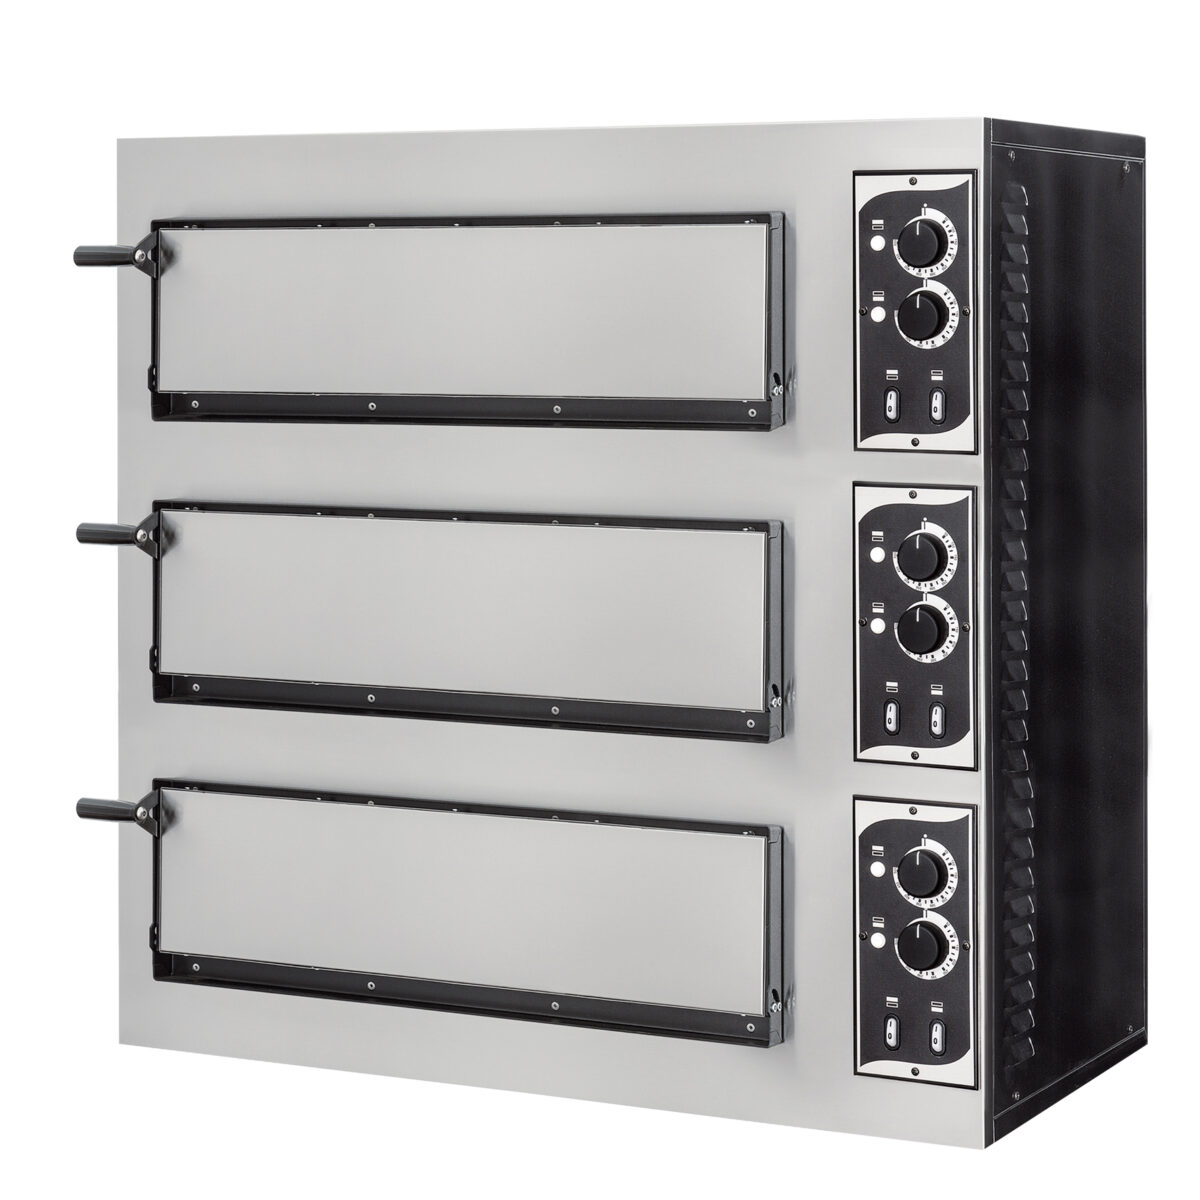 BASIC 3/50 6T- 1+1+1 x ø45cm Pizzas Three Deck Electric Oven (6 Thermostats)